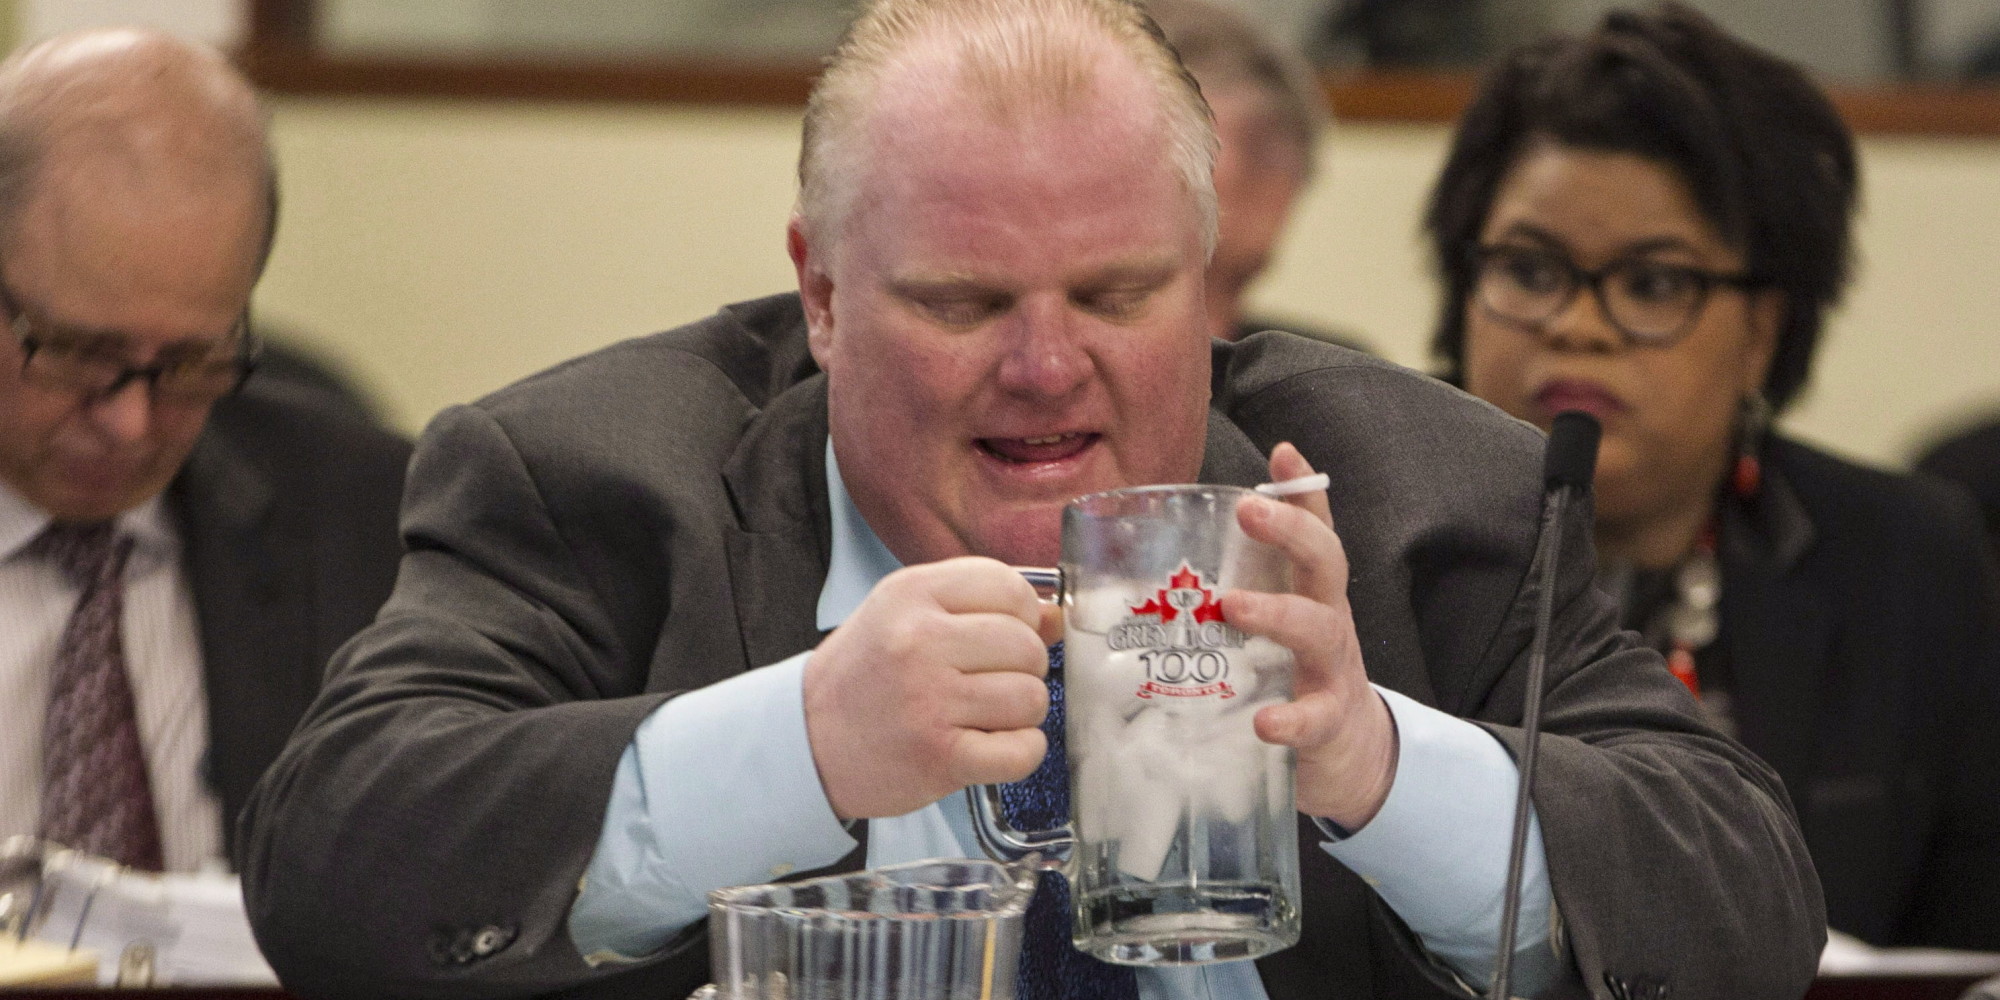 Rob ford and layoffs #8